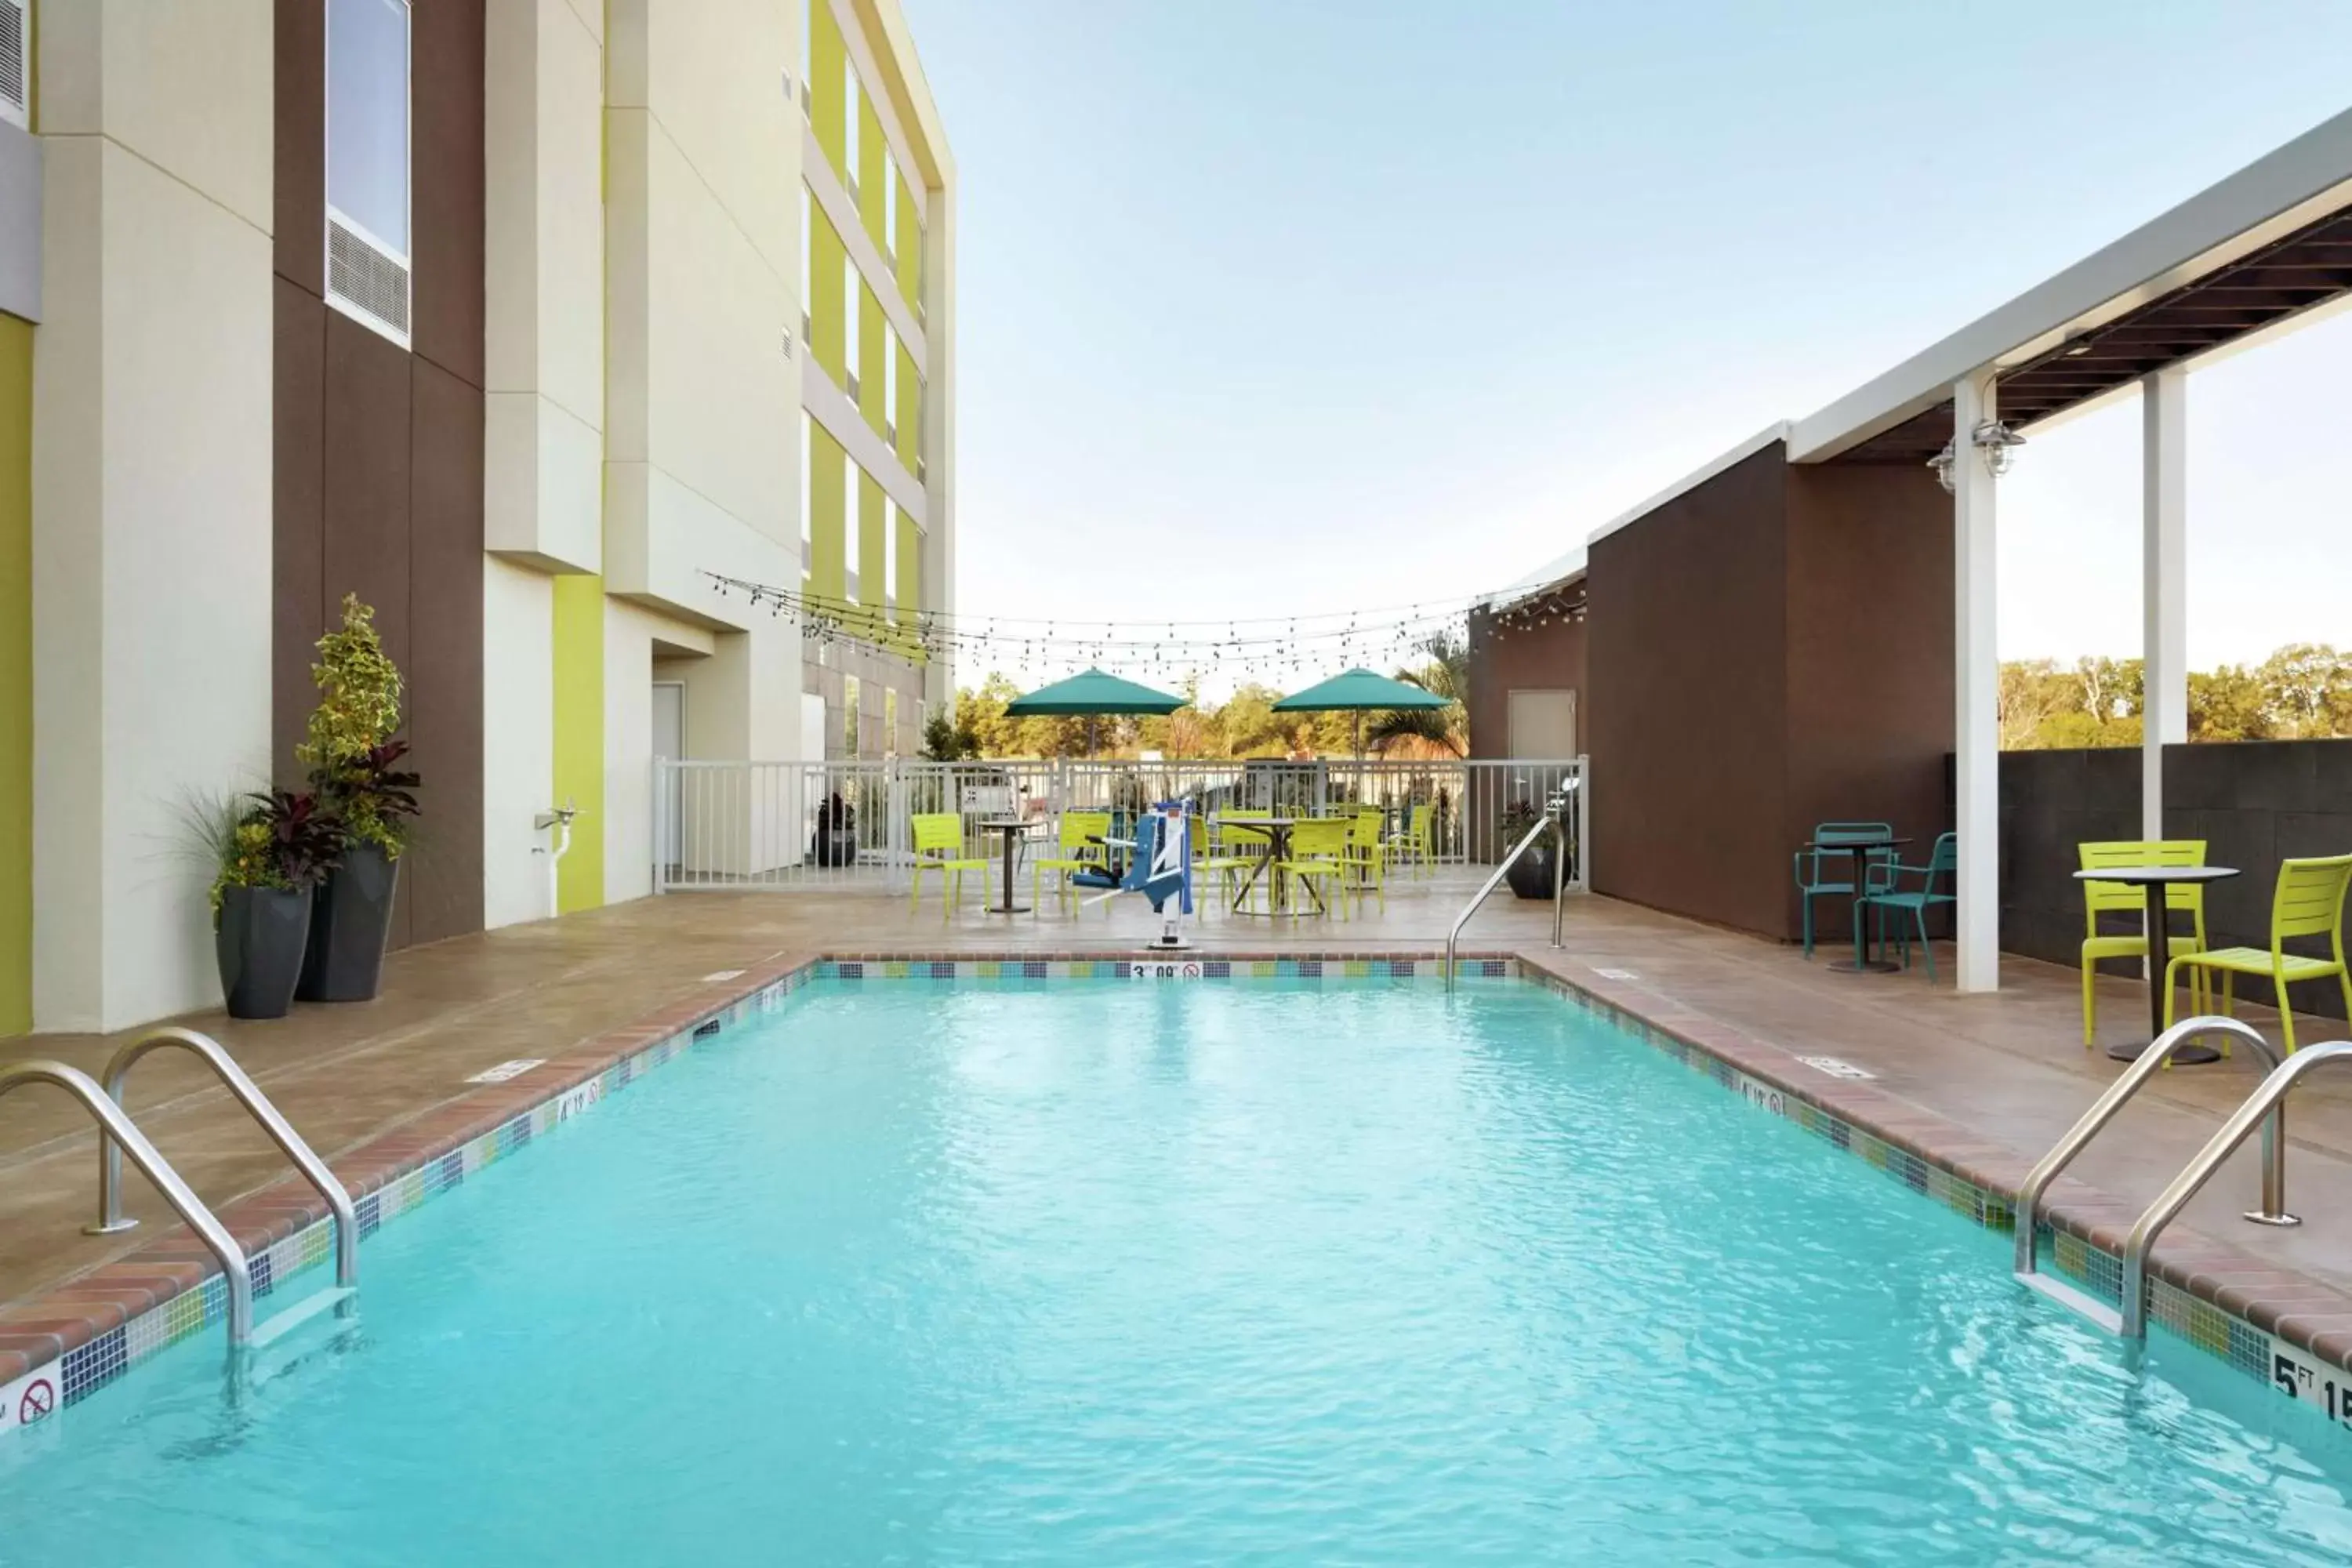 Swimming Pool in Home2 Suites by Hilton West Monroe